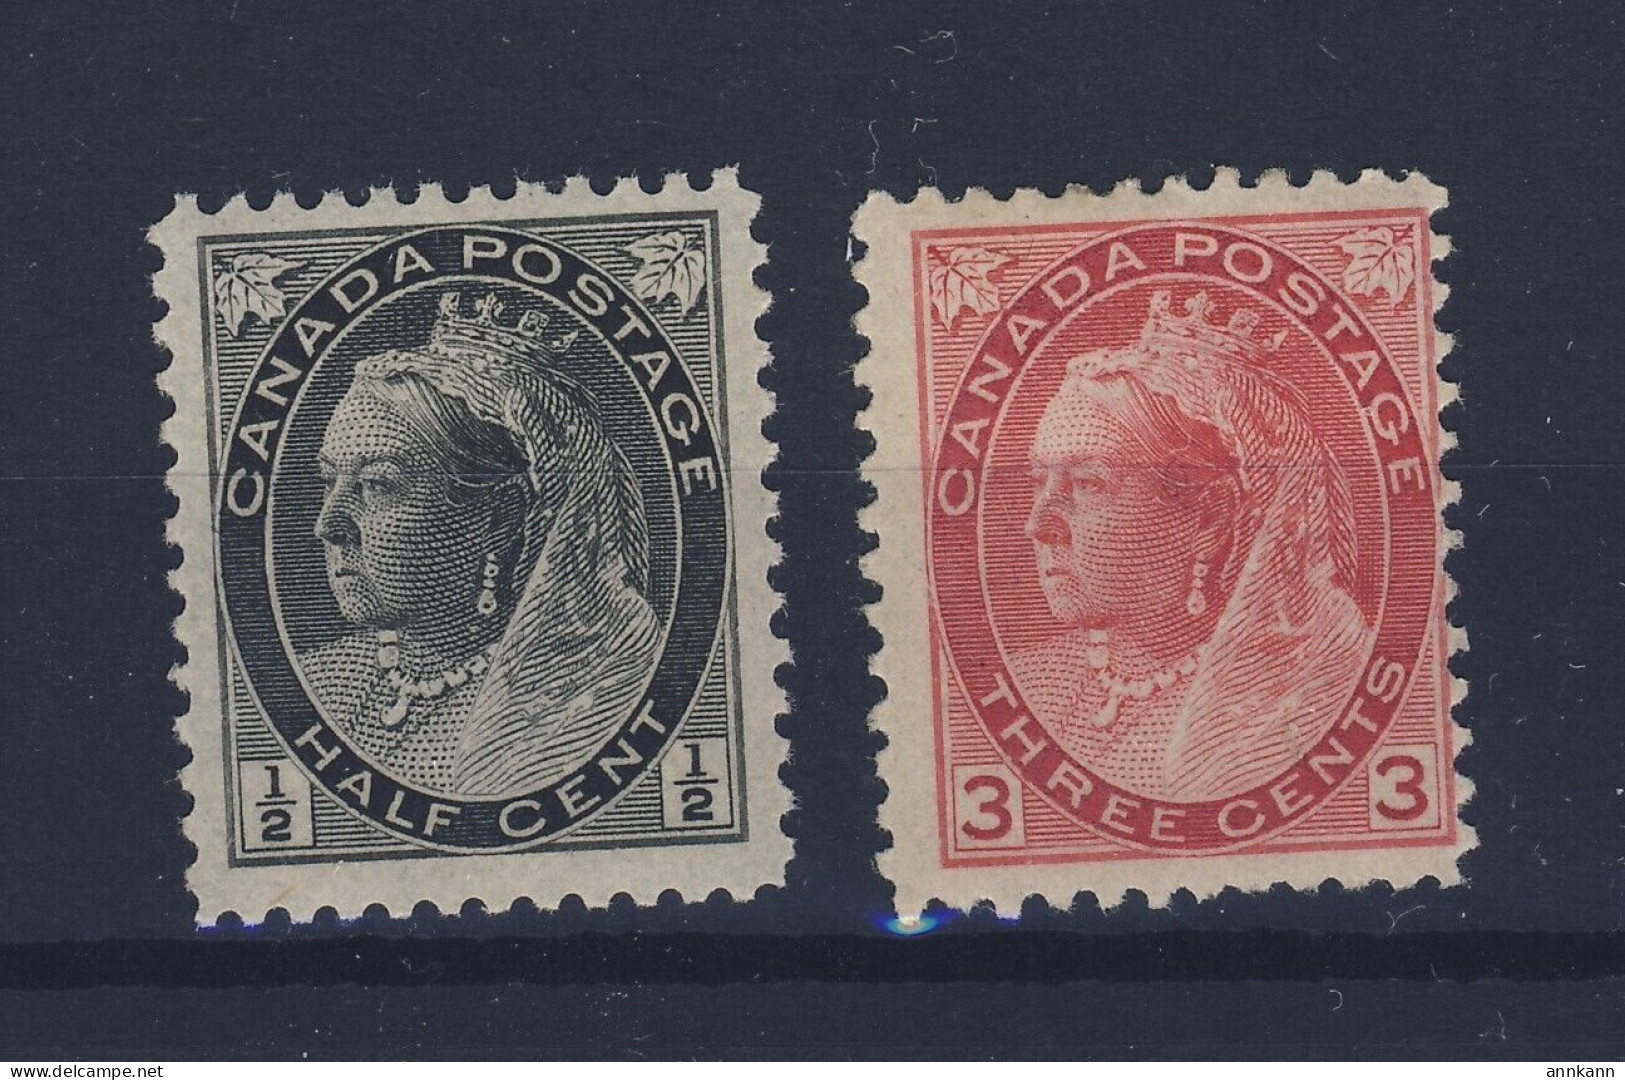 2x Canada Victoria Numeral Stamps; #74-1/2c MNH F/VF #78-3c MH F GV = $65.00 - Neufs